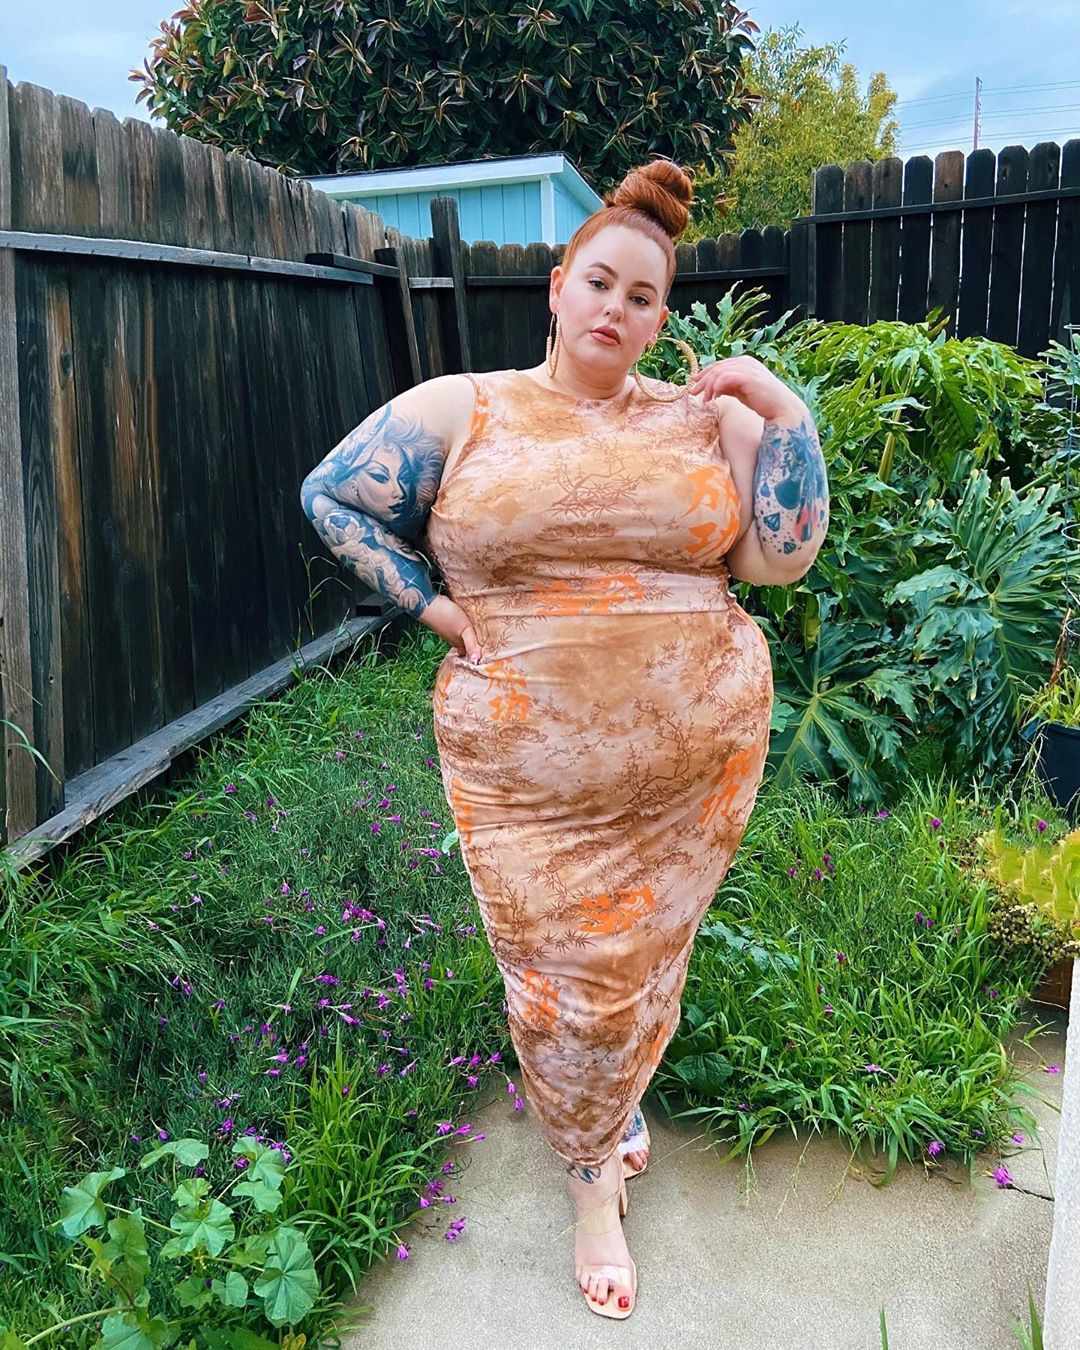 Plus-Size Model Tess Holliday Strikes Co-Pro Deal With Glass